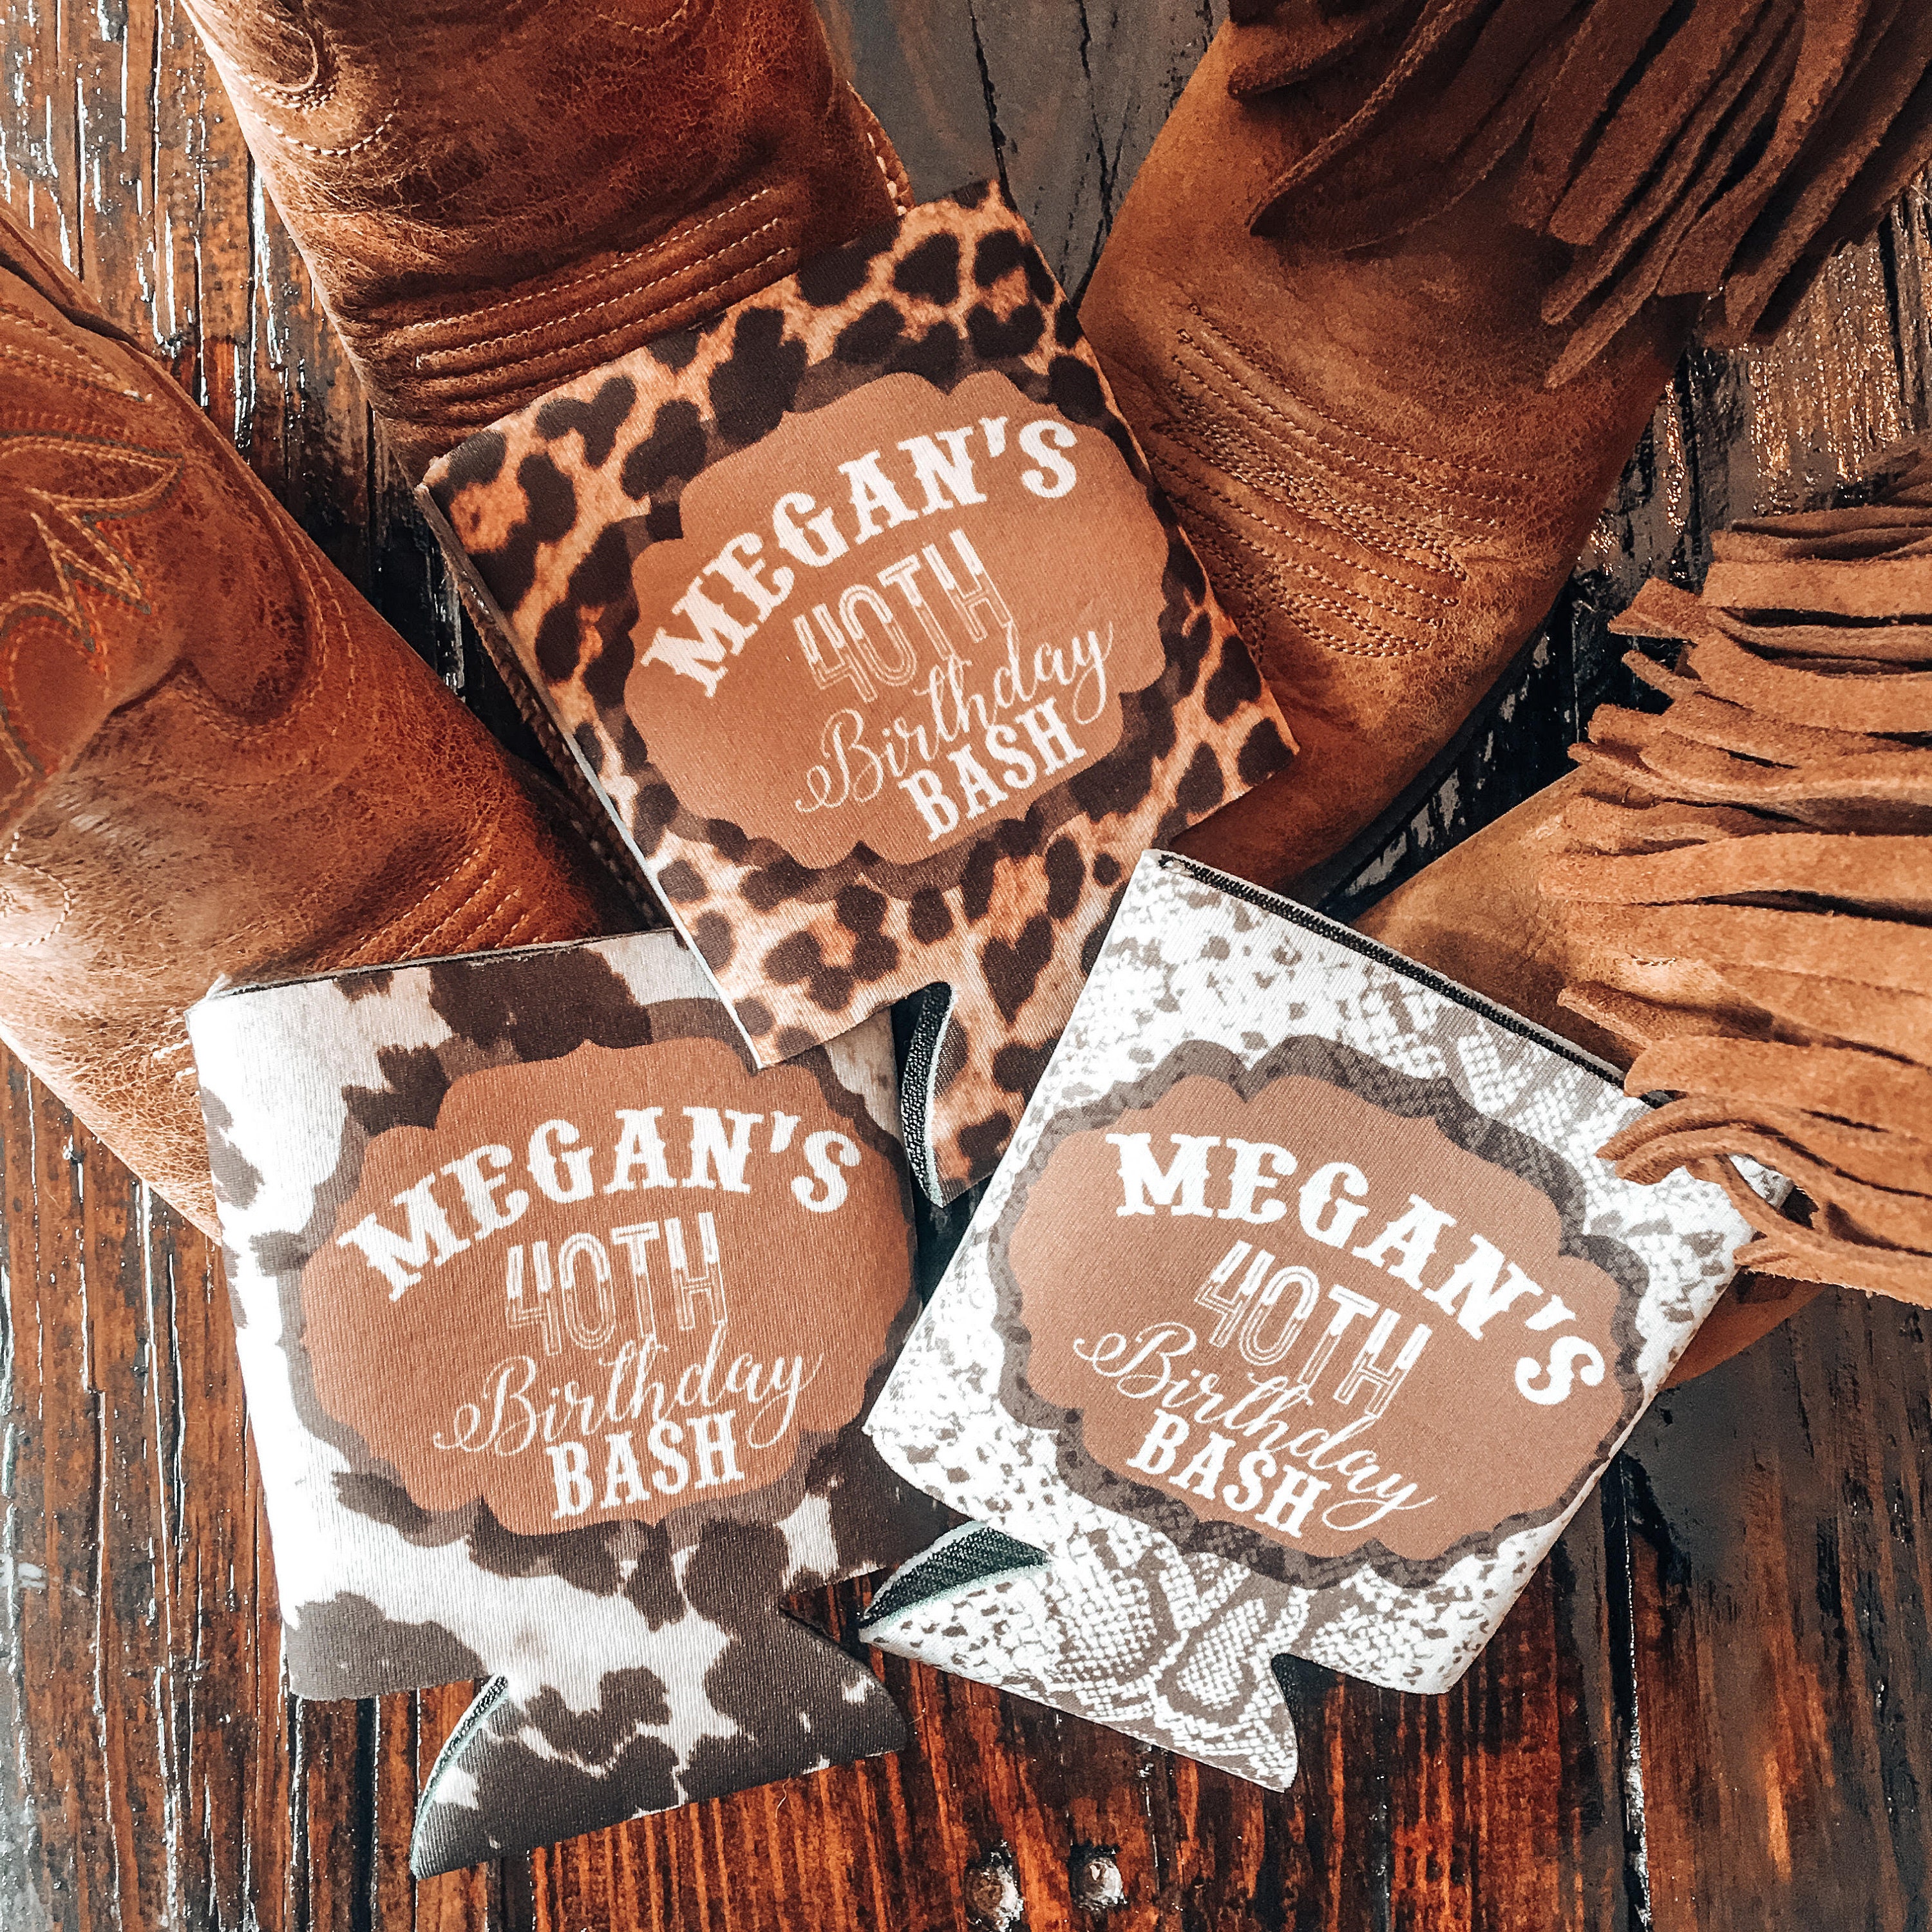 COUNTRY MUSIC AND BEER THAT'S WHY I'M HERE TALL BOY KOOZIE –